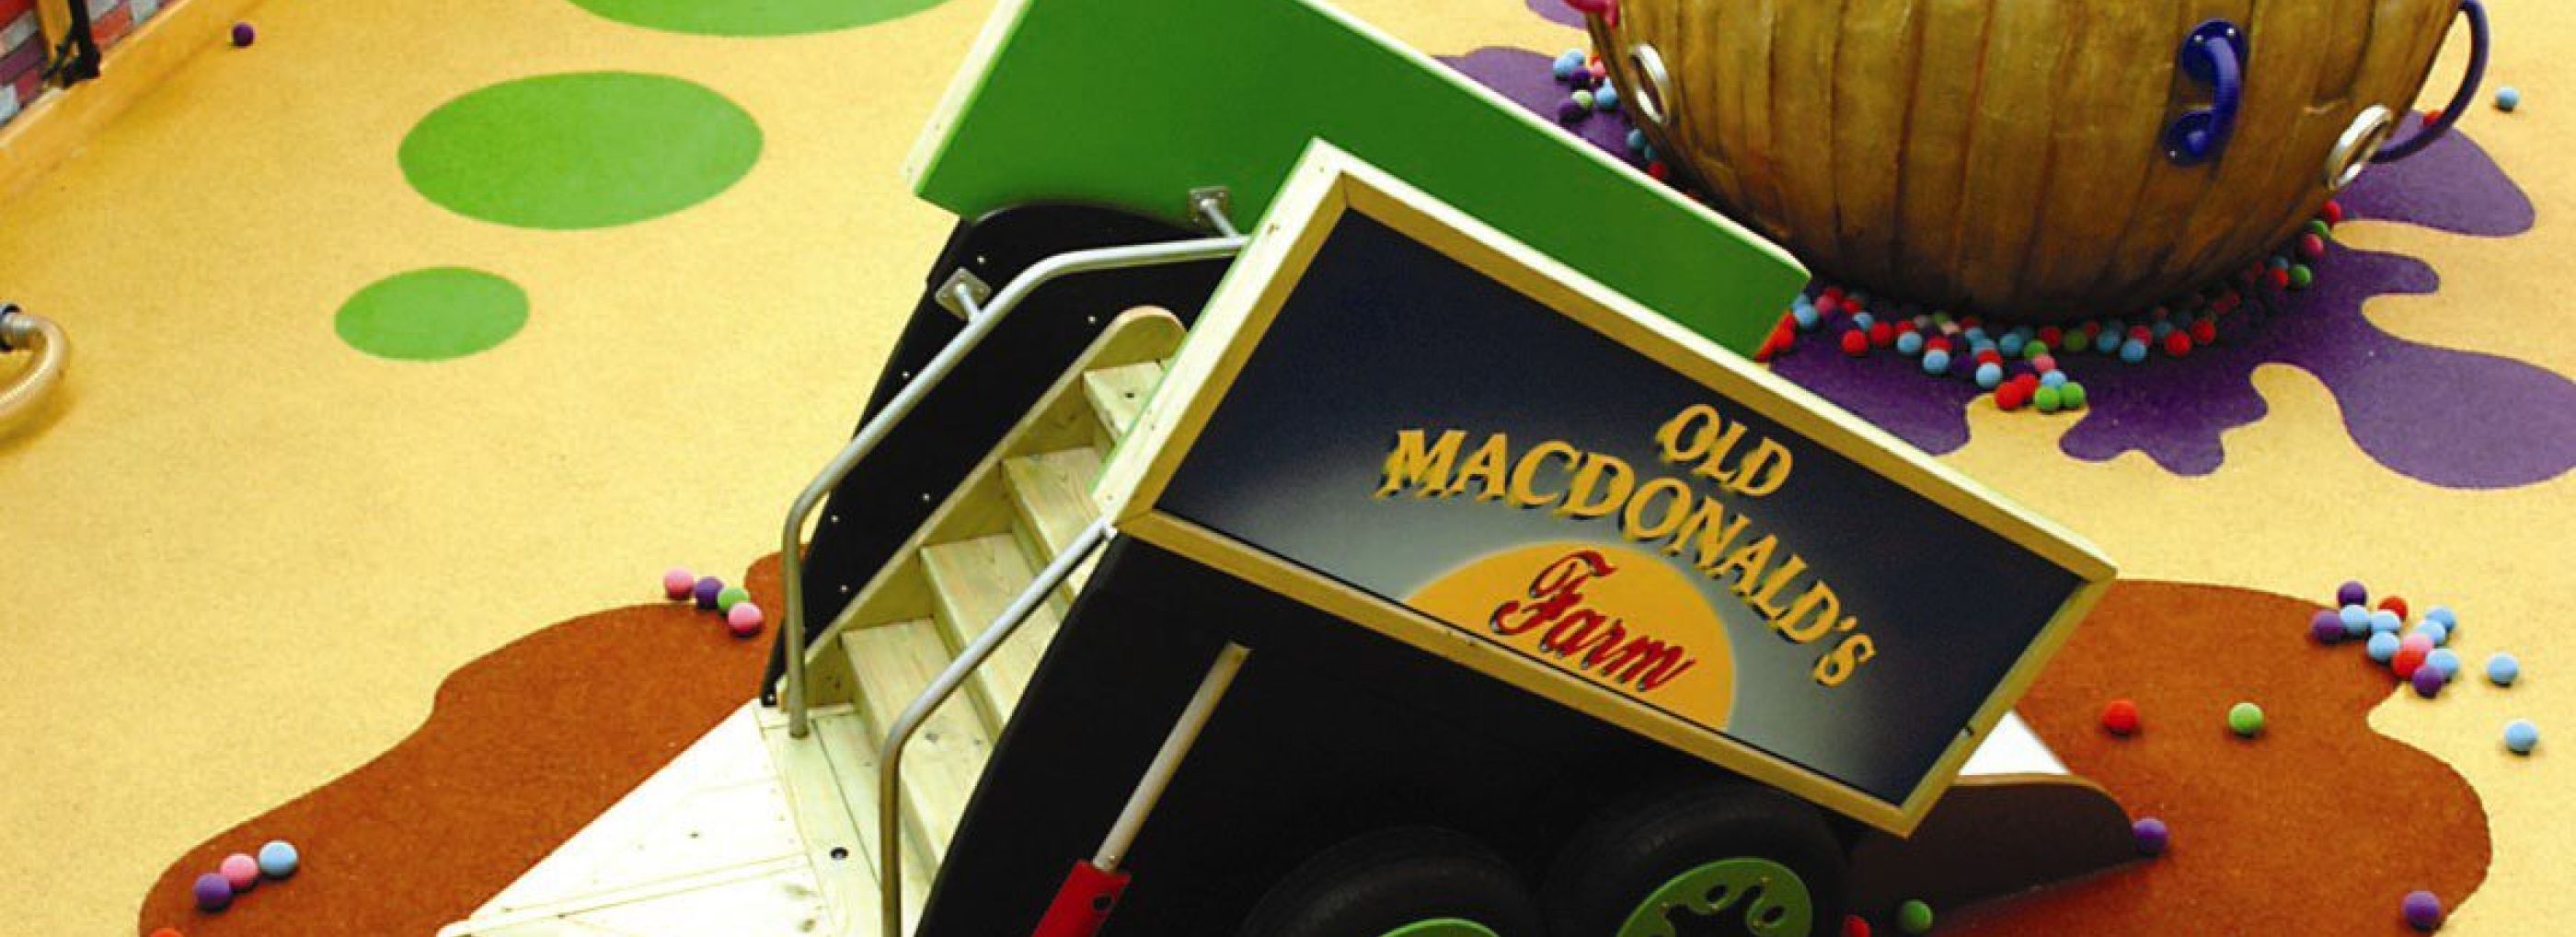 A indoor playground designed to look like a farm with a close up of a truck as a slide.